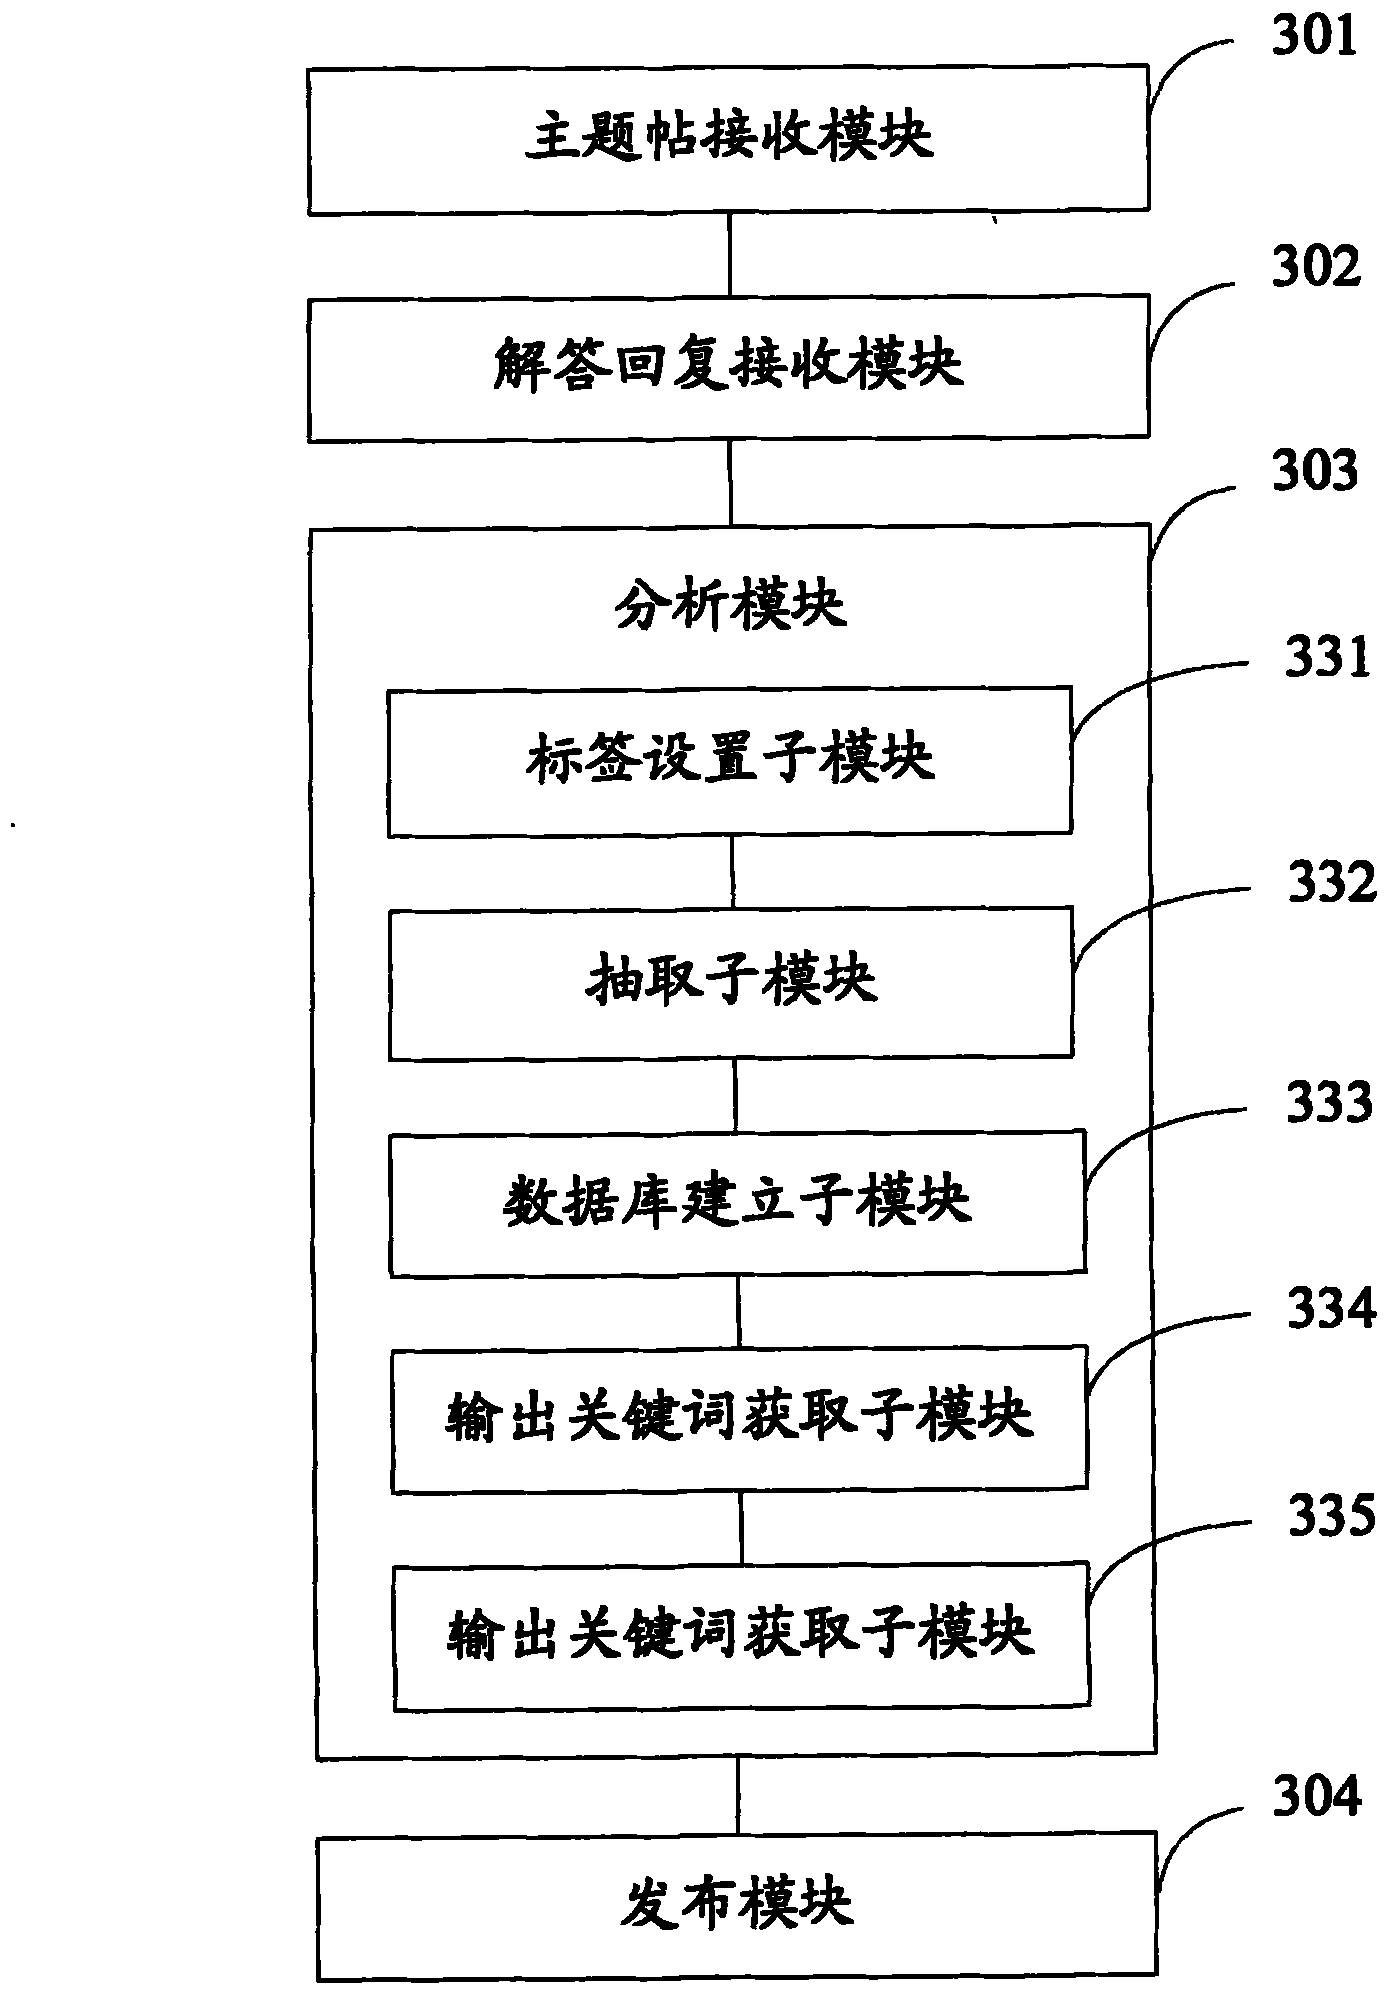 Method and system for transferring medical professional information